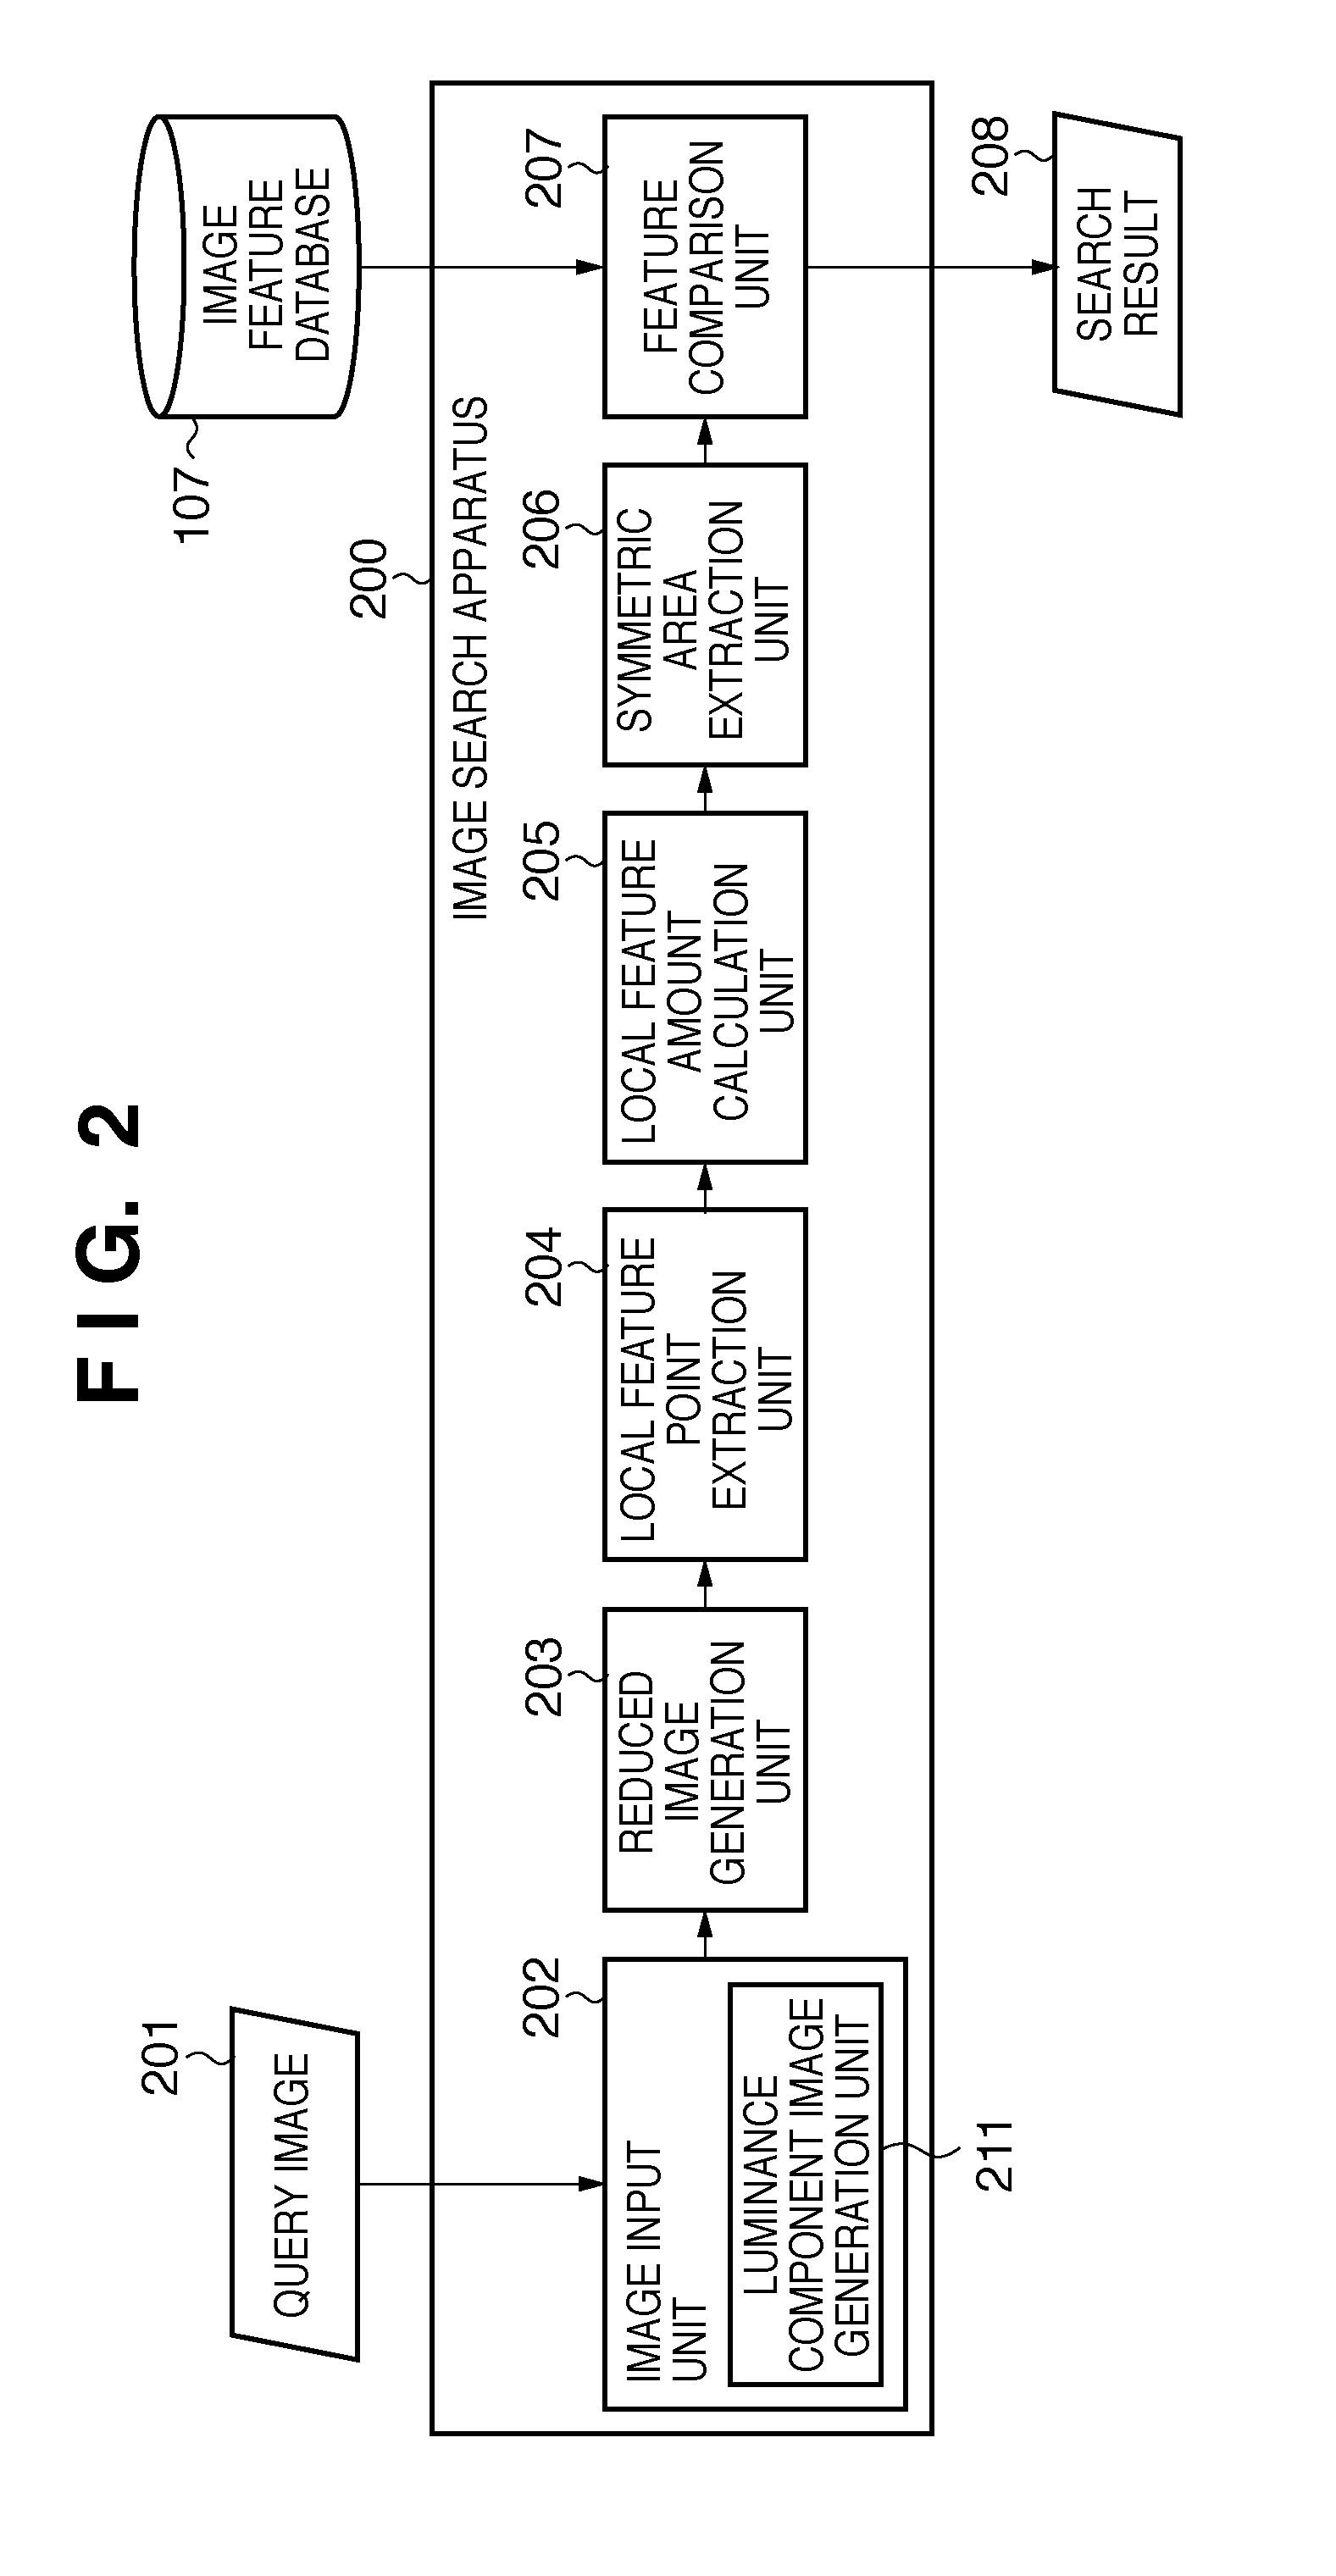 Image search apparatus and method thereof